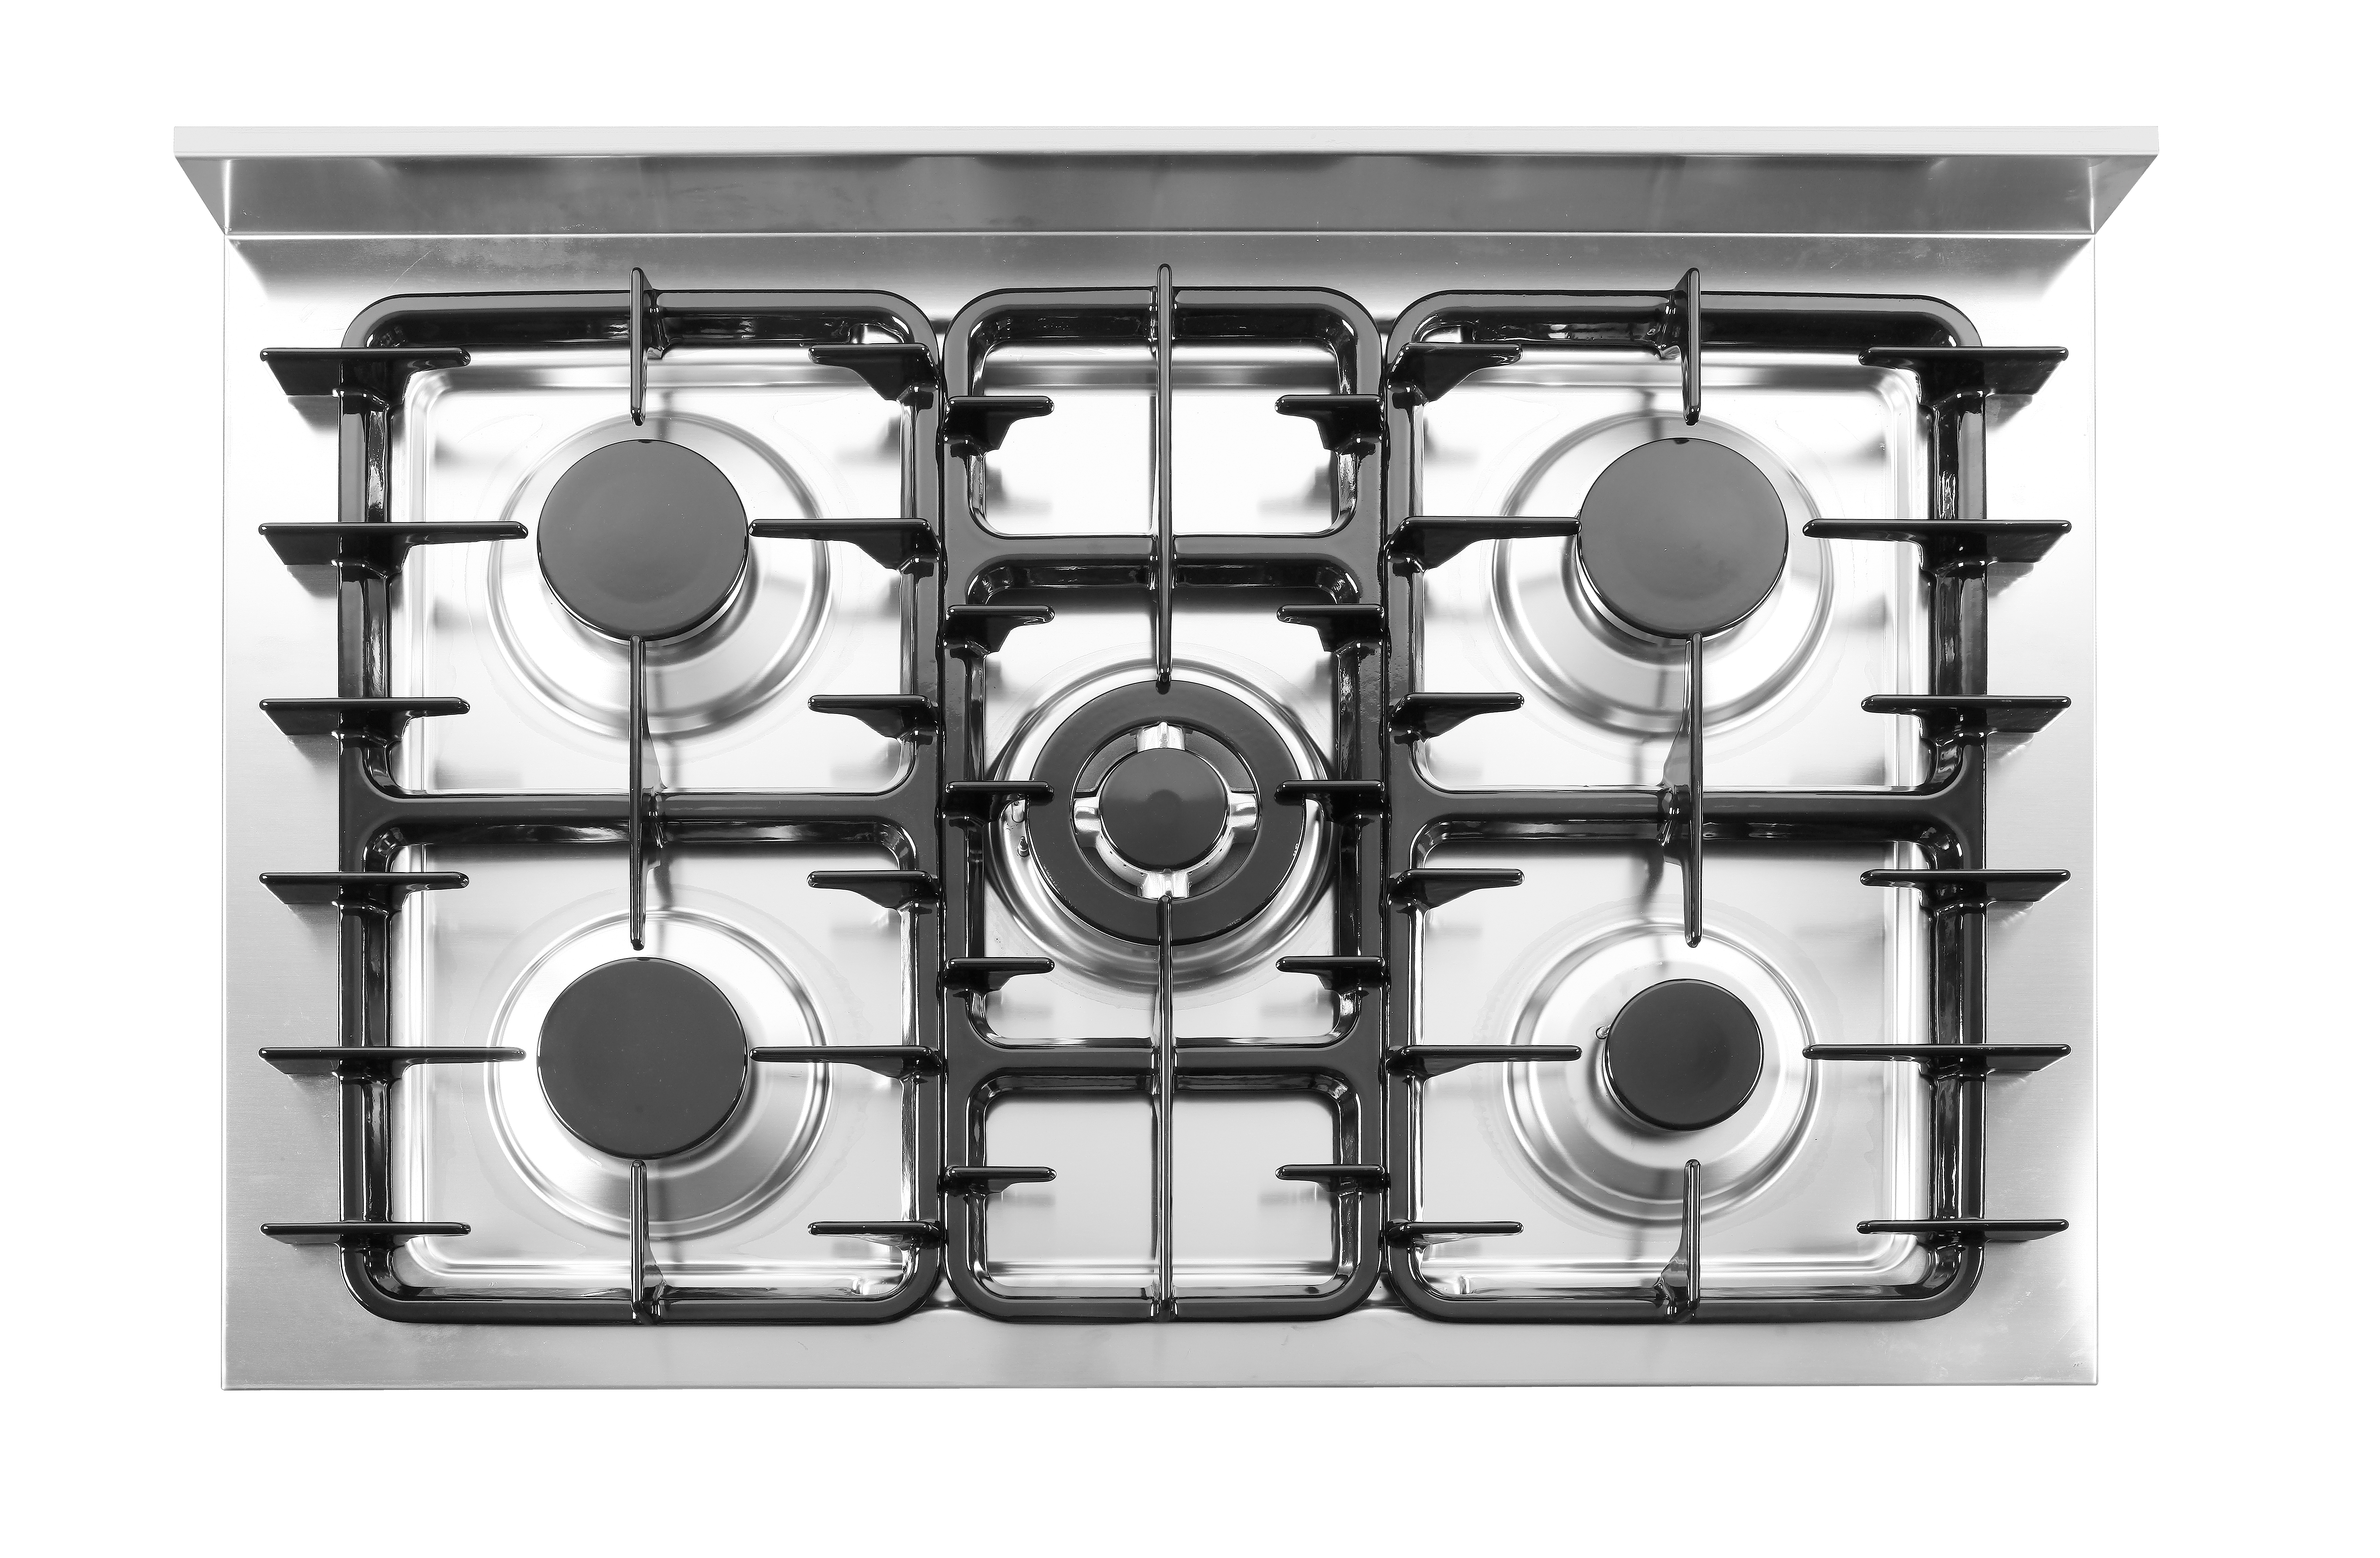 Stainless Steel Double Burner Dual Gas Stove Home Kitchen Cooktop Cooker Simlug Stainless Double Burner Gas Stove 